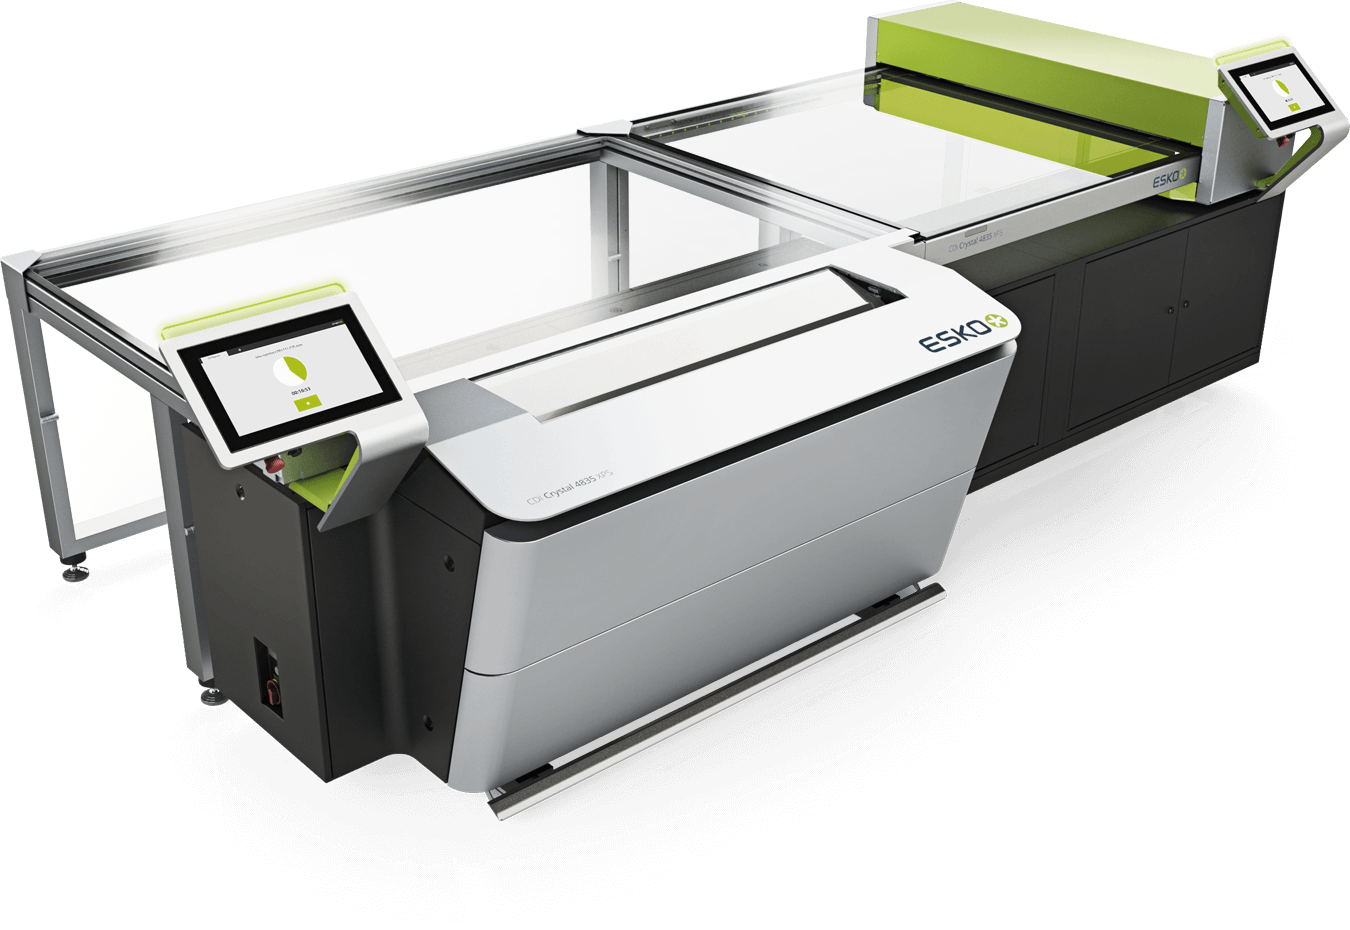 CDI Crystal XPS: Removing complexity by integrating the imager and exposure unit